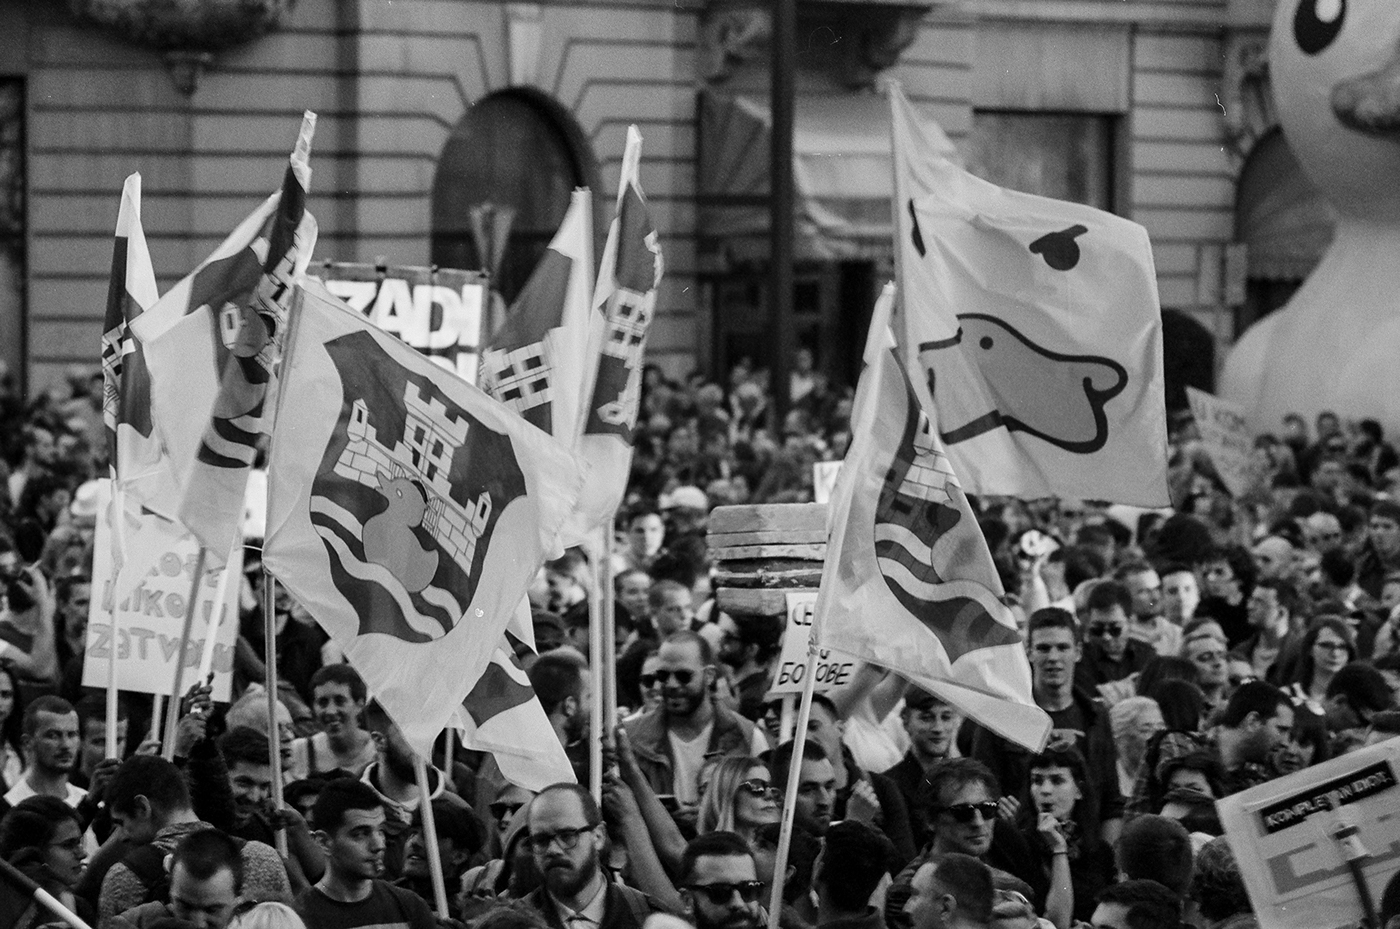 protests beograd belgrade Elections Serbia Street people city demonstrations protest